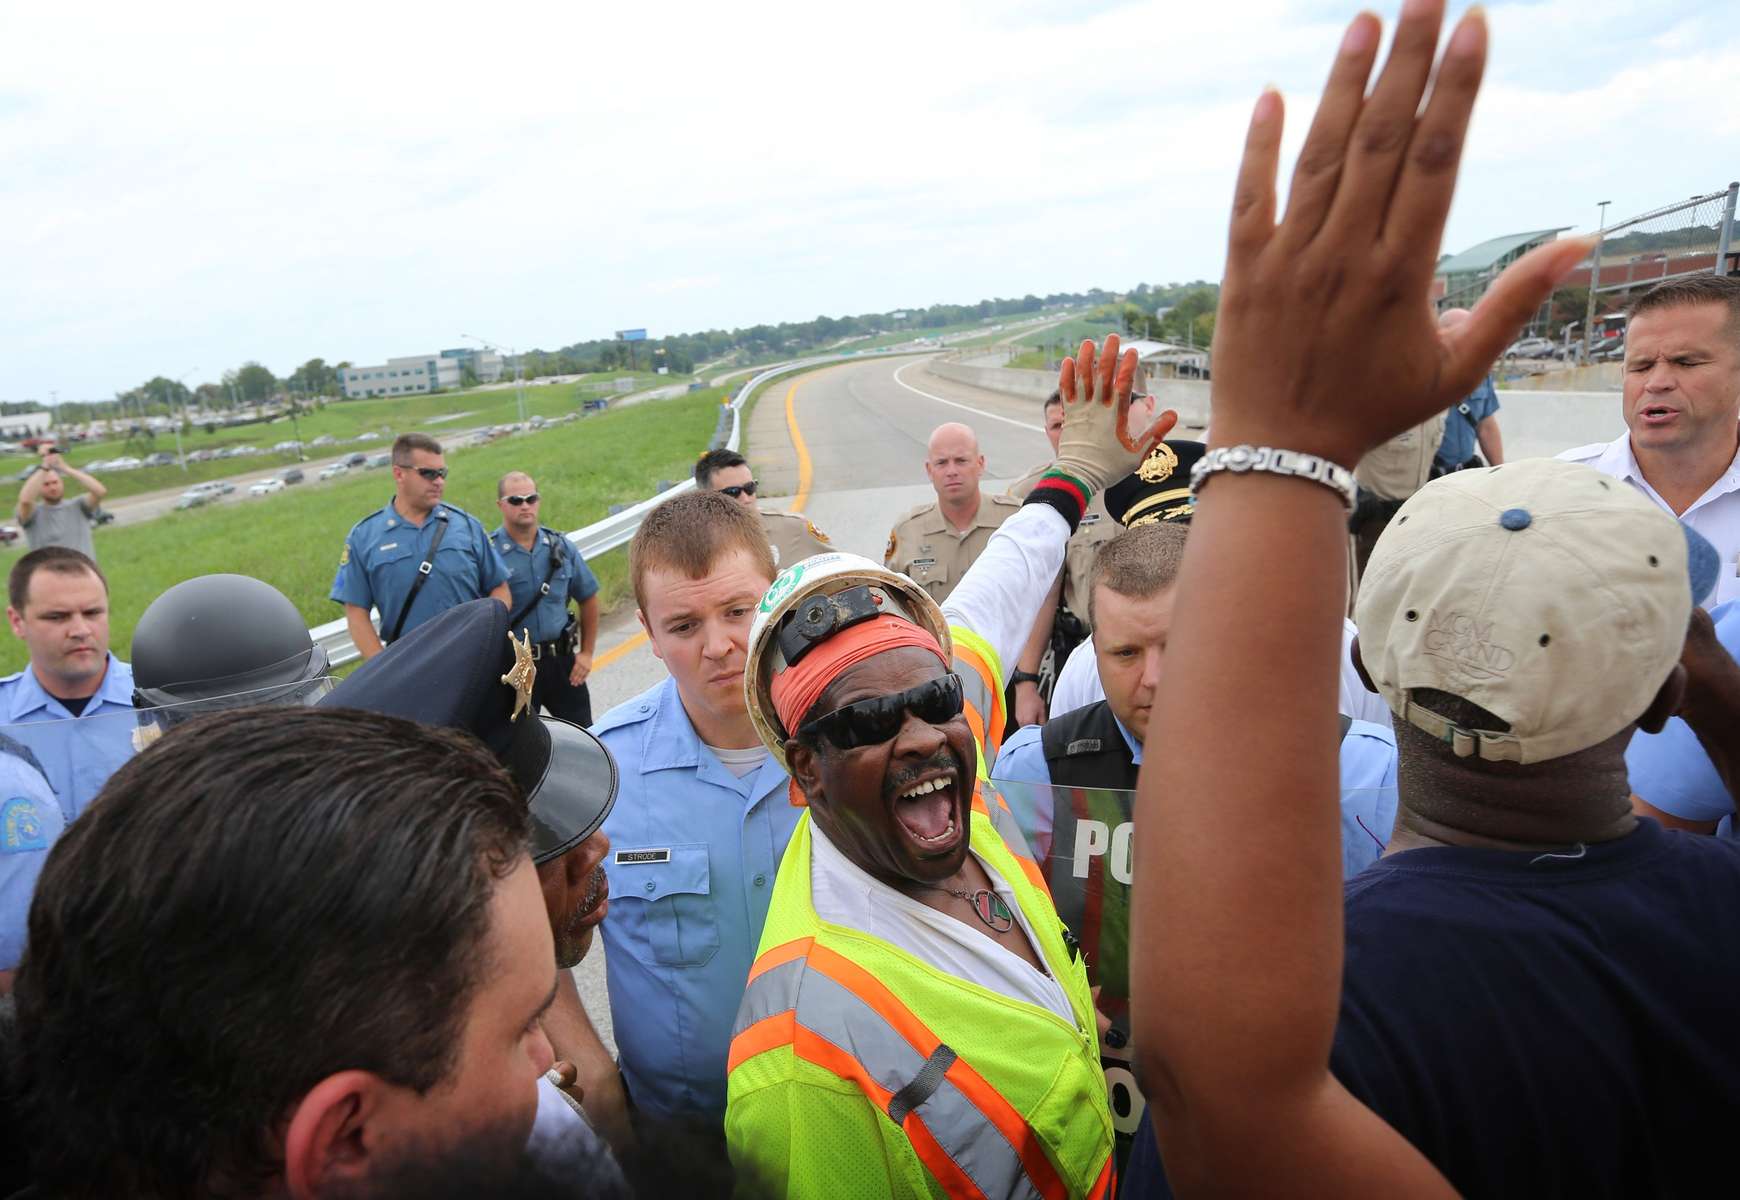 Cleo Willis (center) yells to fellow demonstrators squaring office with police who were blocking the on ramp to Interstate 70 East at Hanley Road during a demonstration in St. Louis County on Wednesday, Sept. 10, 2014.  Protesters had announced their intention to shutdown traffic on Interstate 70 to protest the fatal shooting of Michael Brown by a Ferguson police officer but police blocked protesters access to the highway.